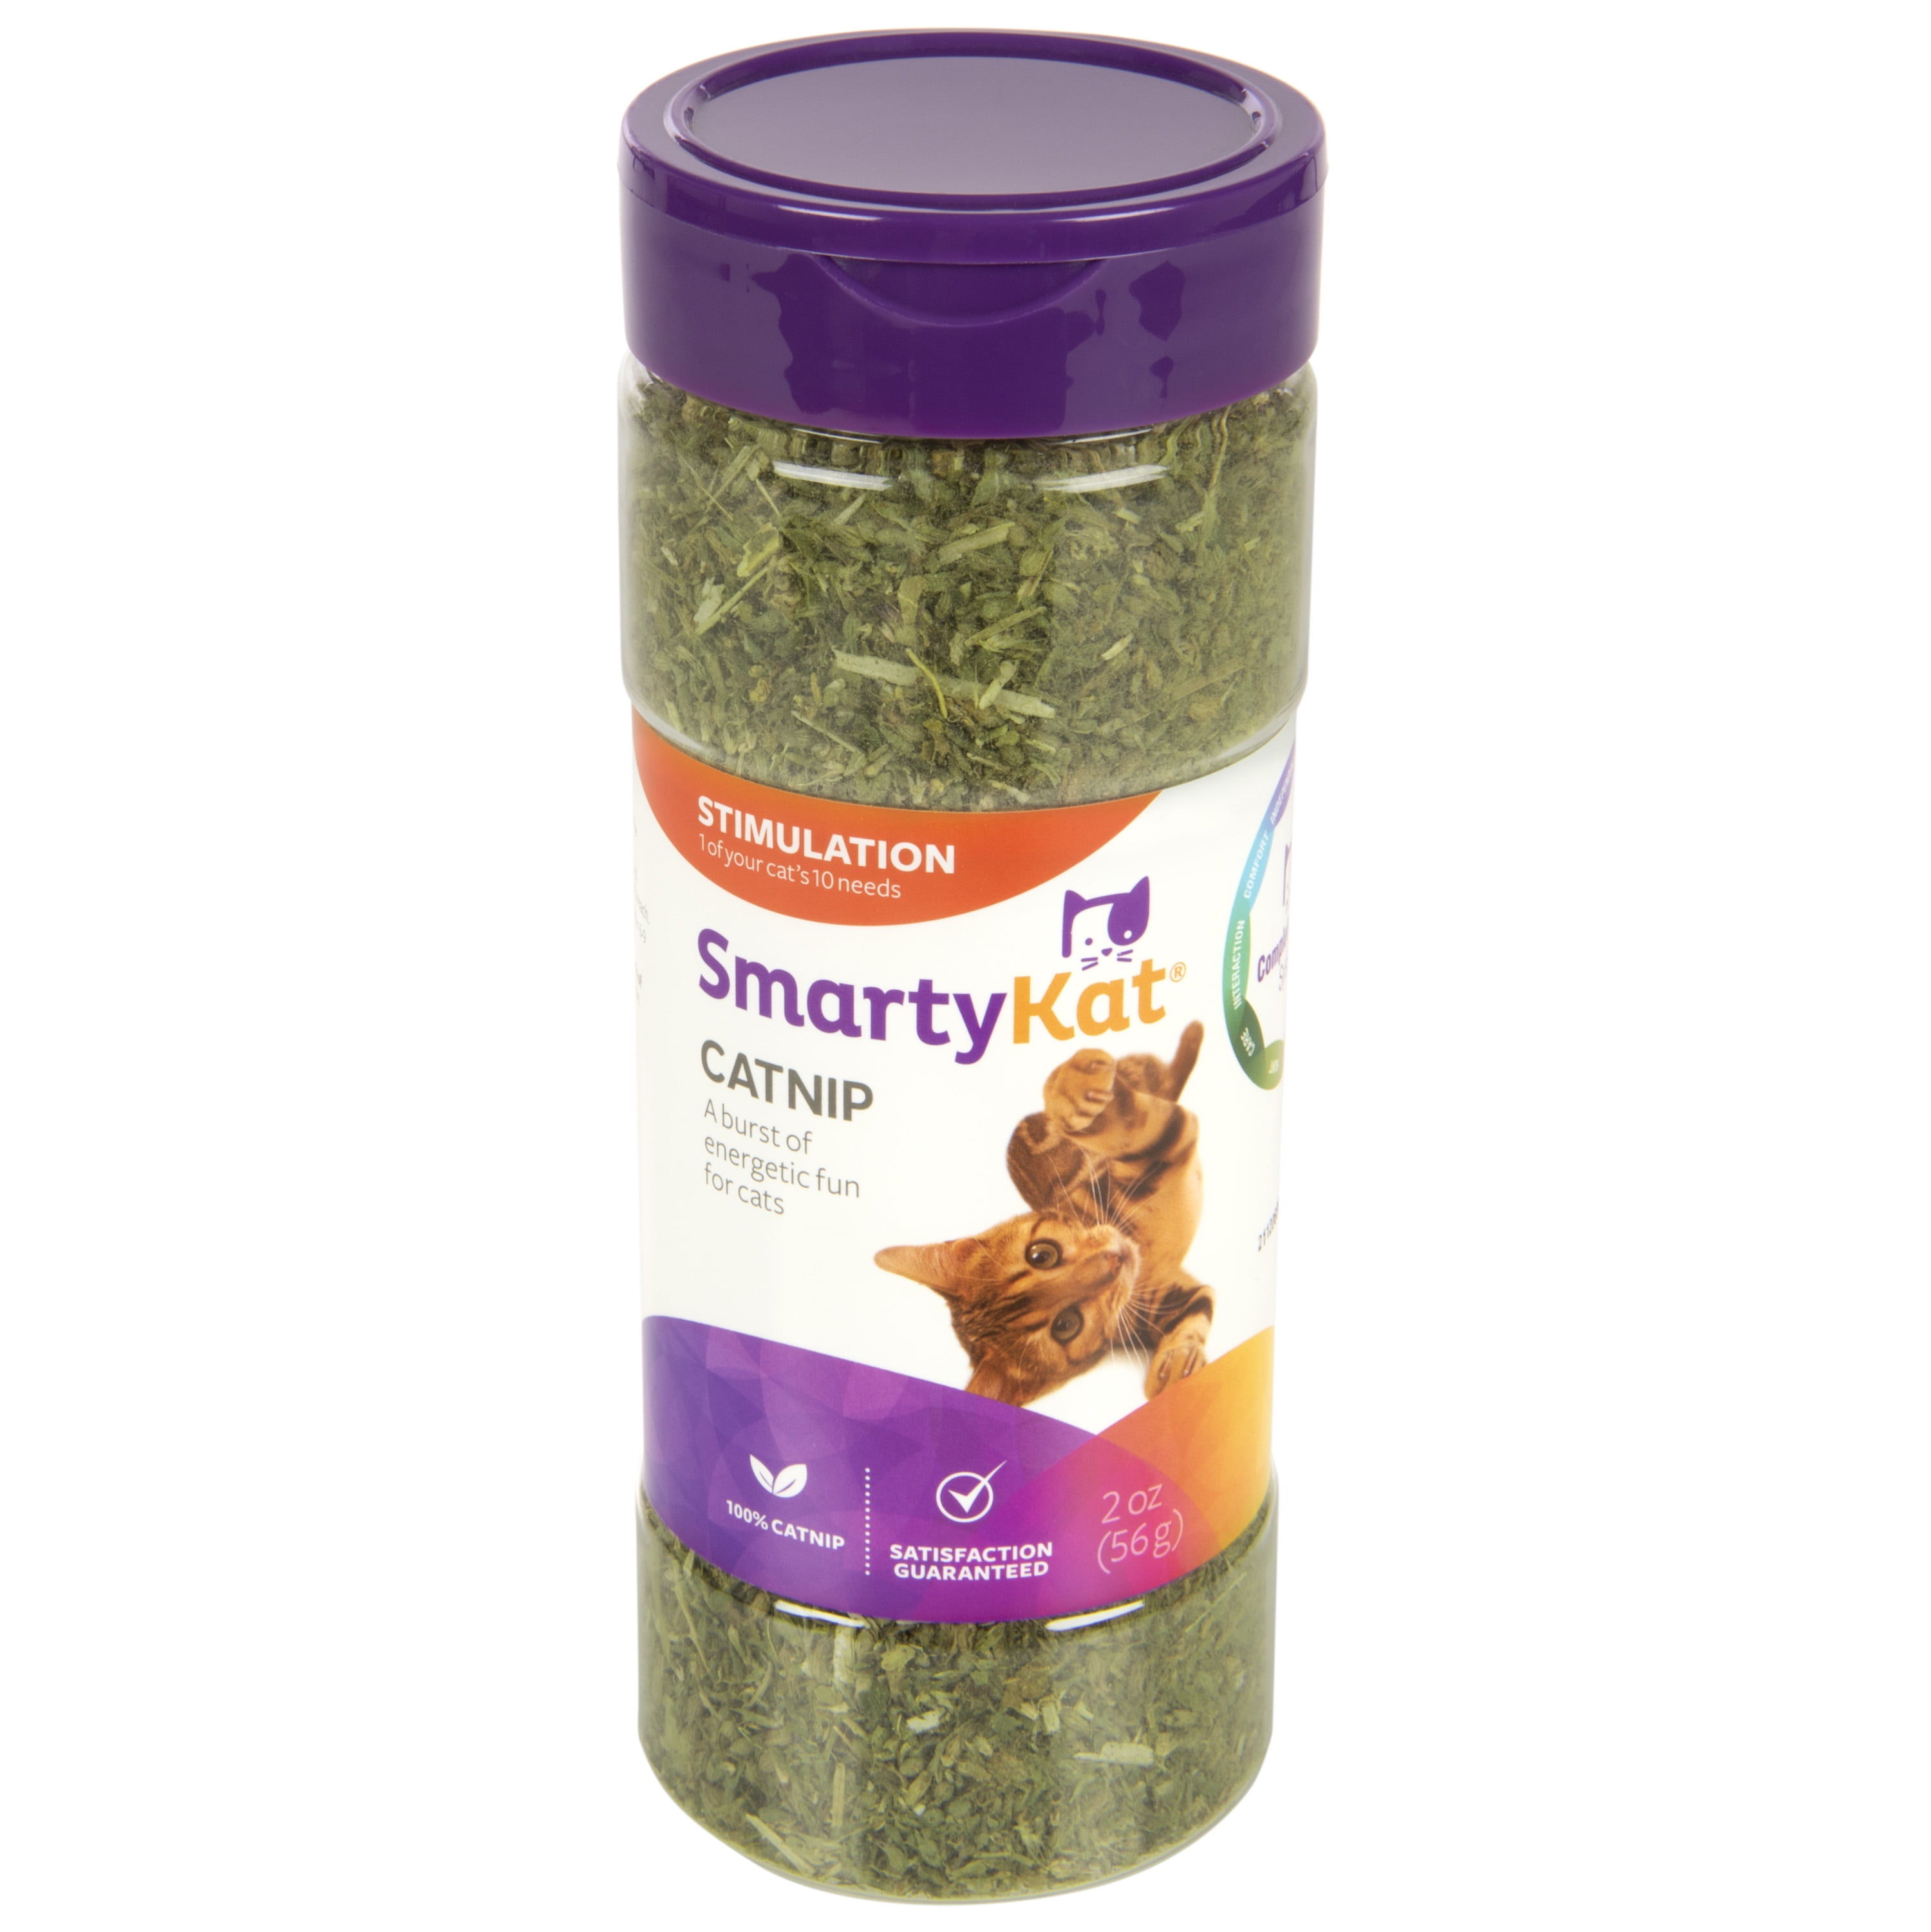 SmartyKat Catnip For Cats, Natural, Pure & Potent, Resealable